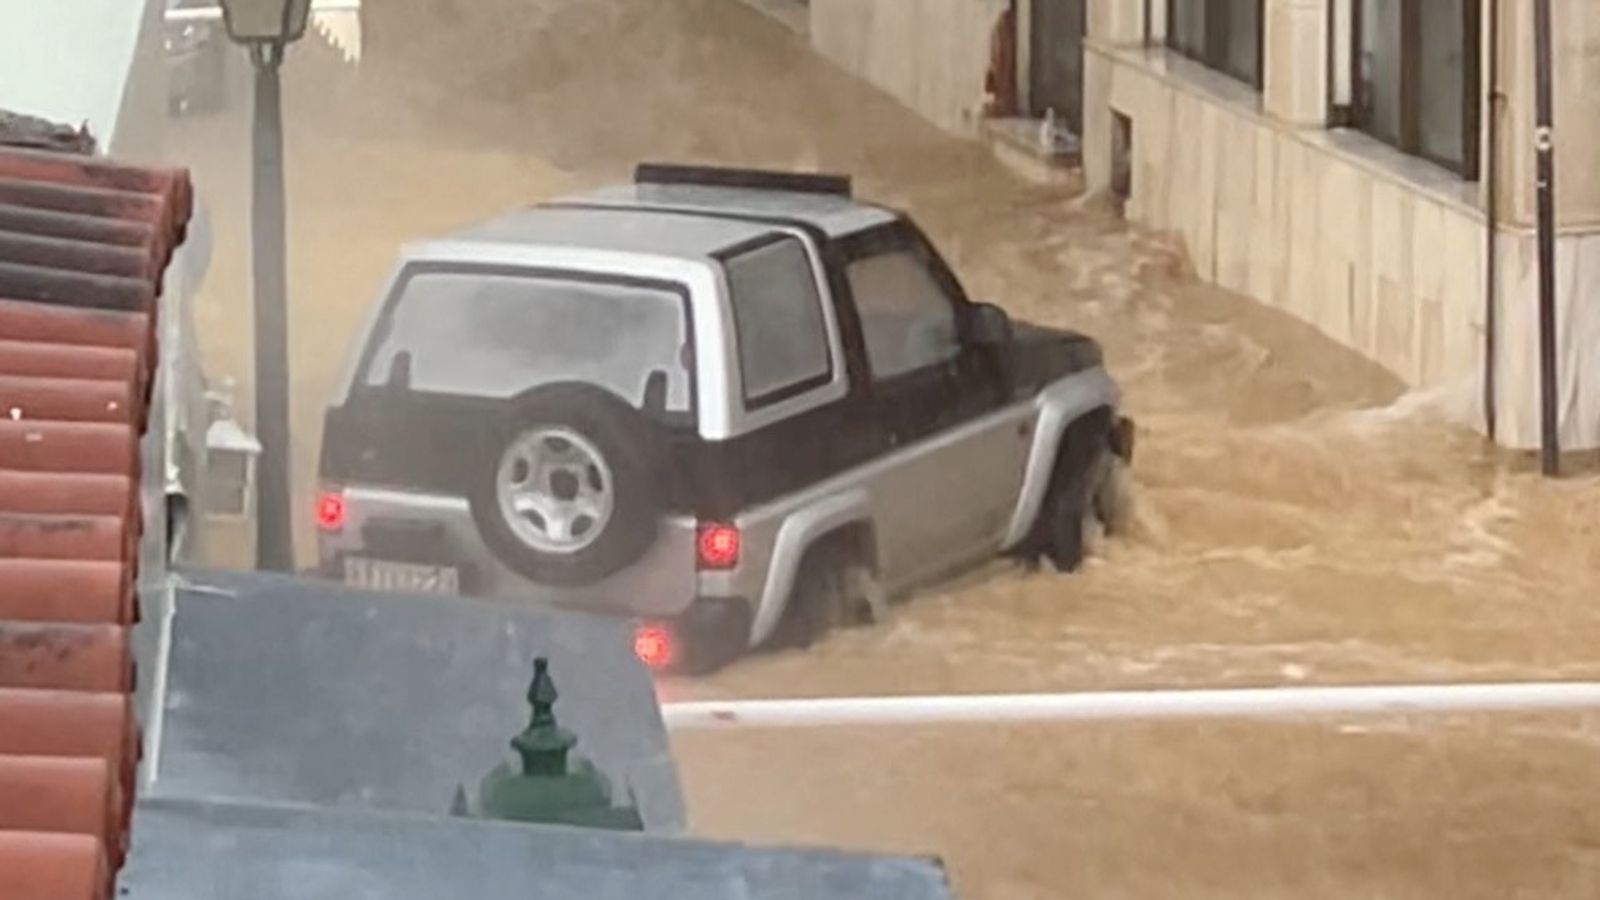 Greece flooding: ‘Scared’ British family told they cannot leave their hotel after ‘biblical’ rainfall